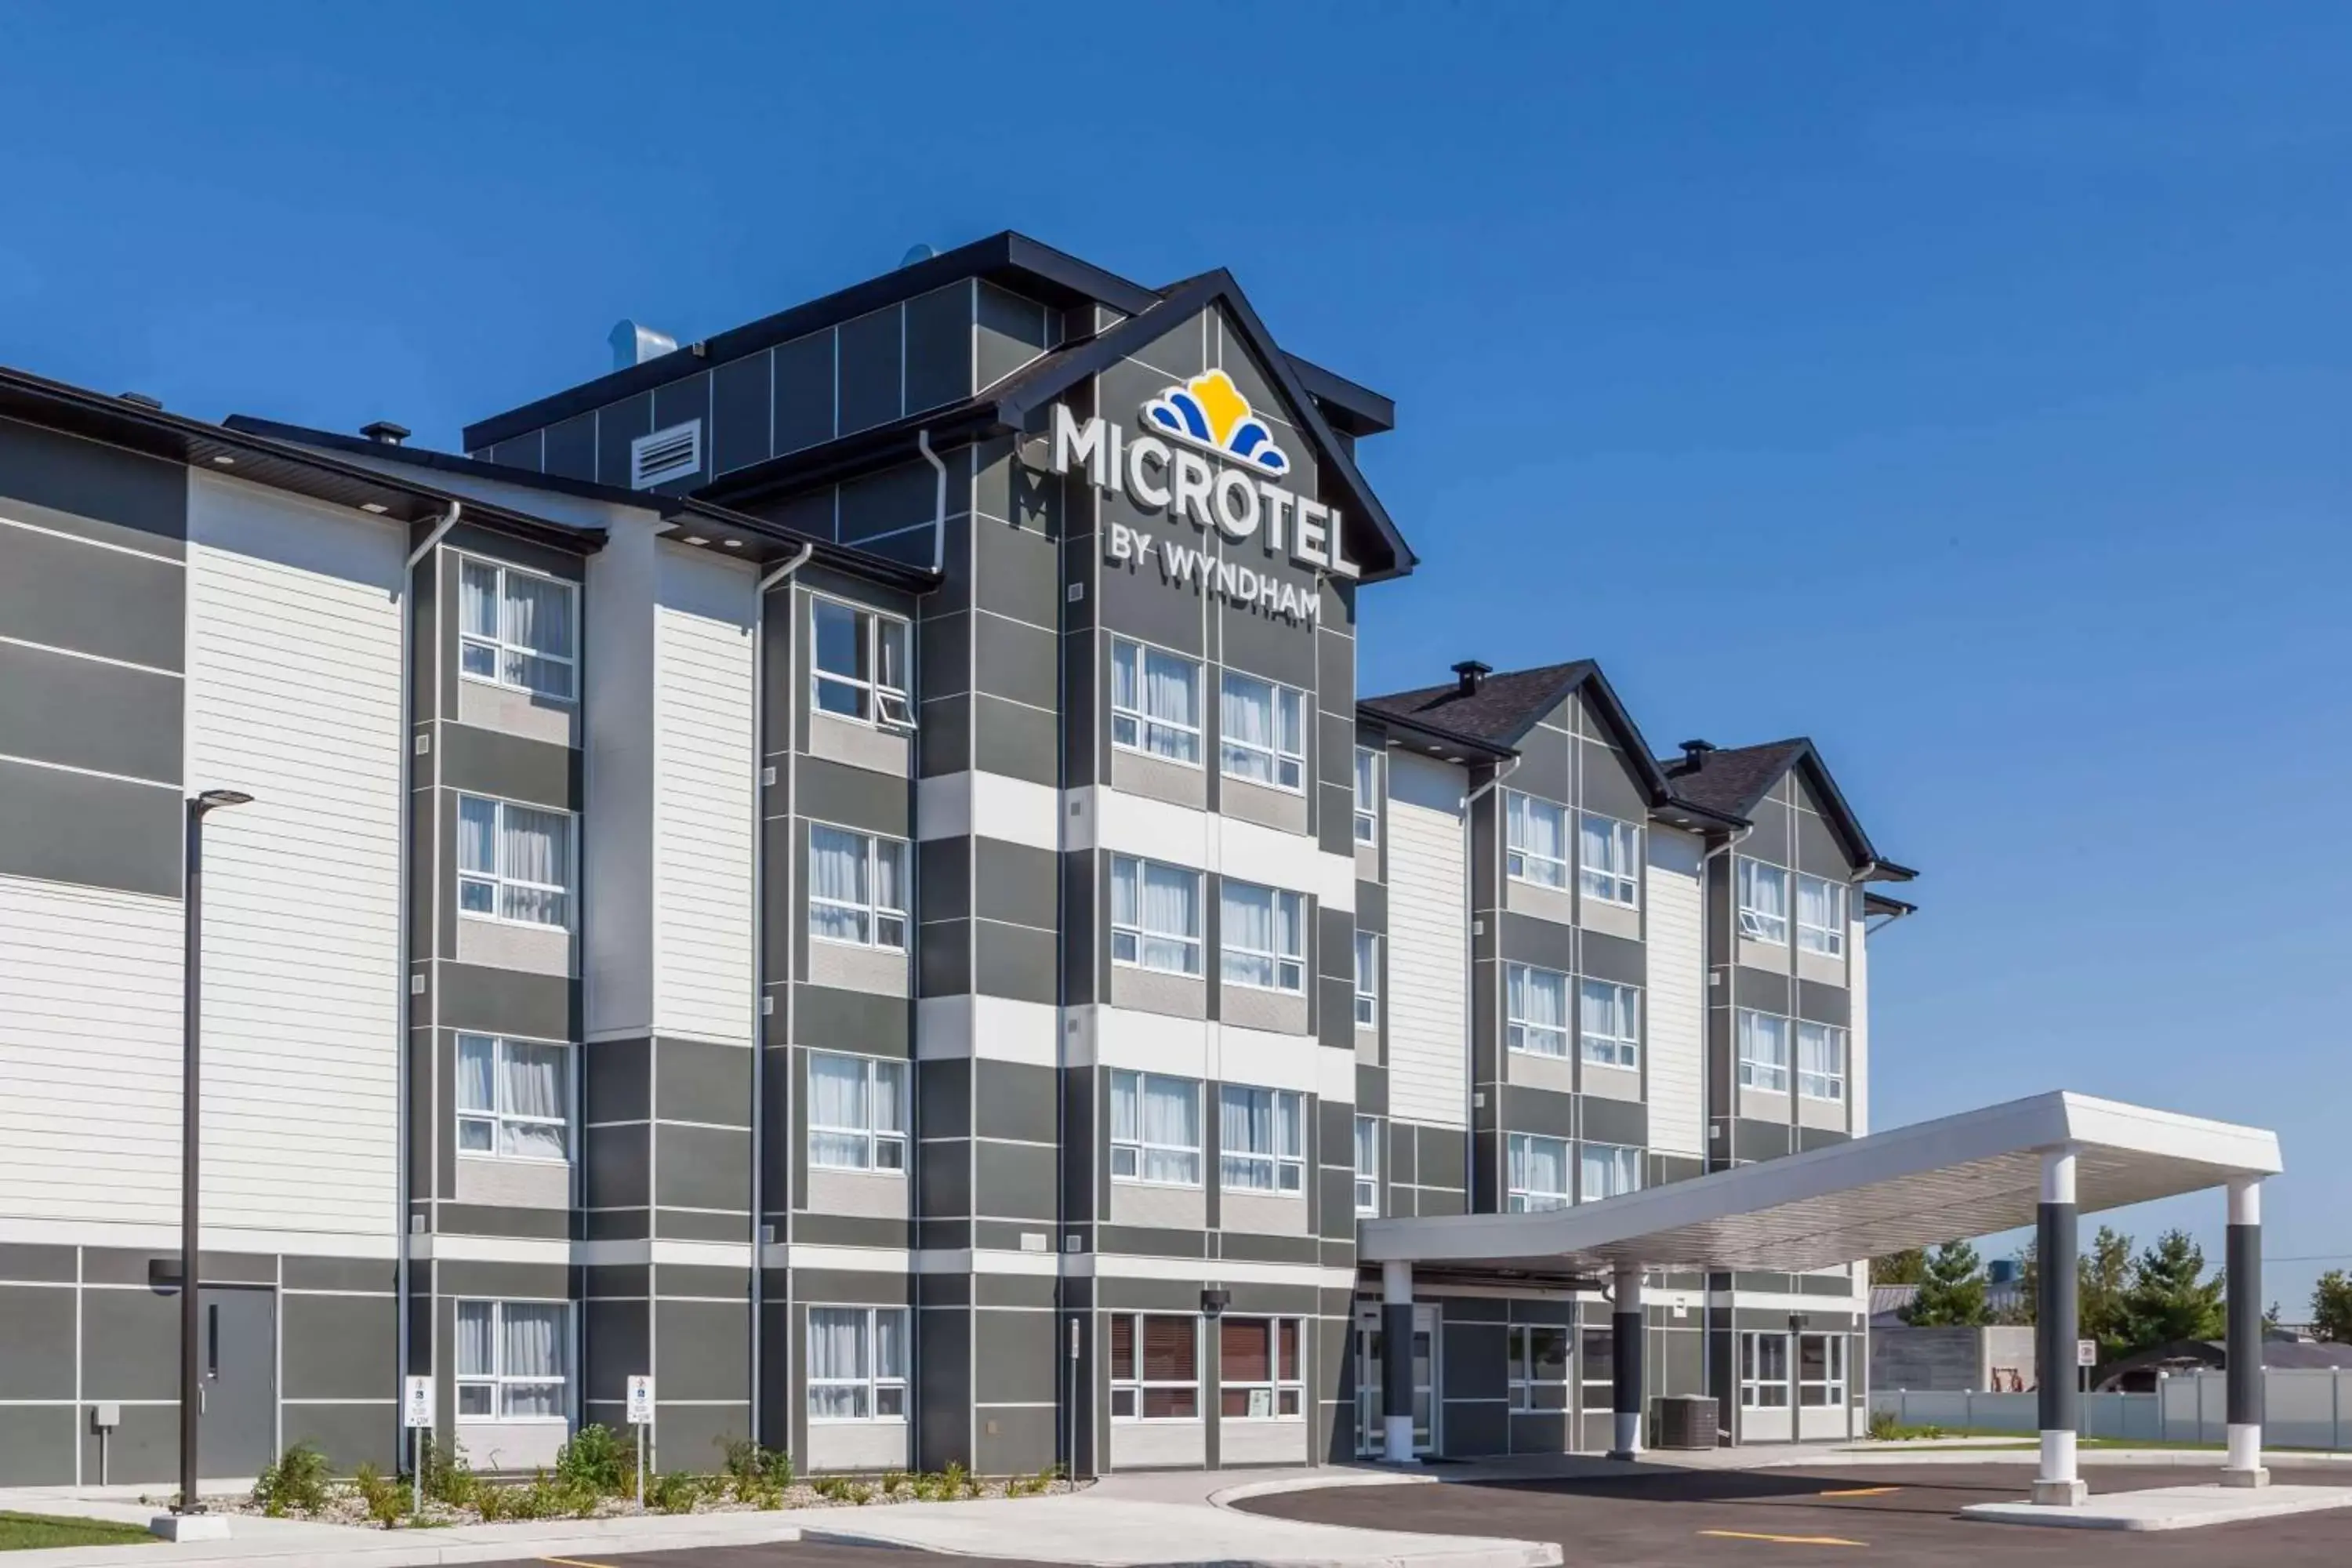 Property building in Microtel Casselman